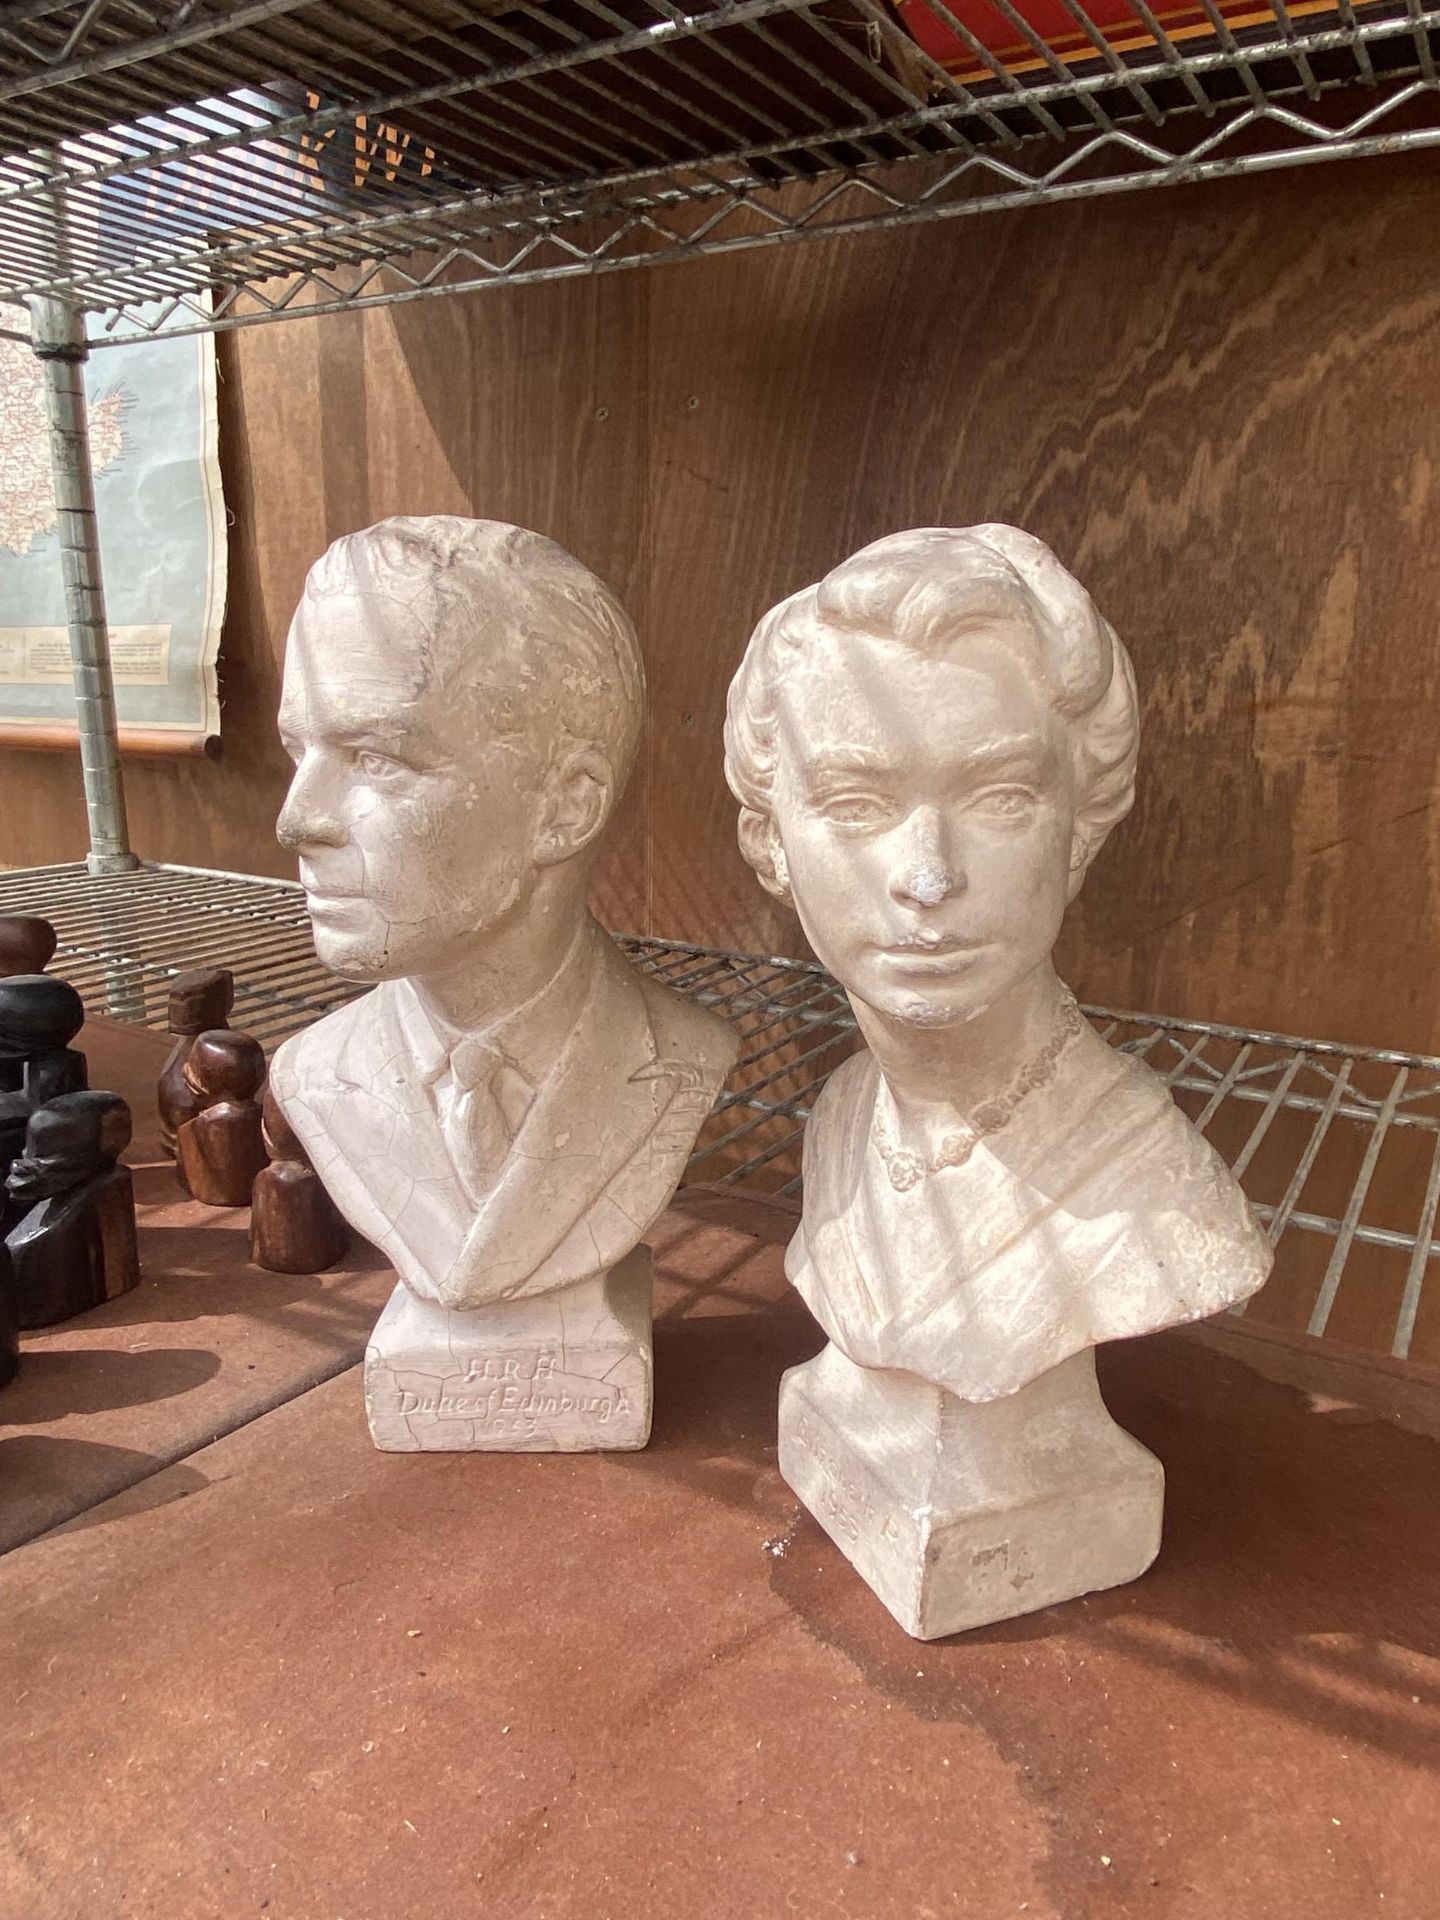 A PAIR OF VINTAGE STONE EFFECT BUSTS OF QUEEN ELIZABETH AND THE DUKE OF EDINBURGH - Image 3 of 4